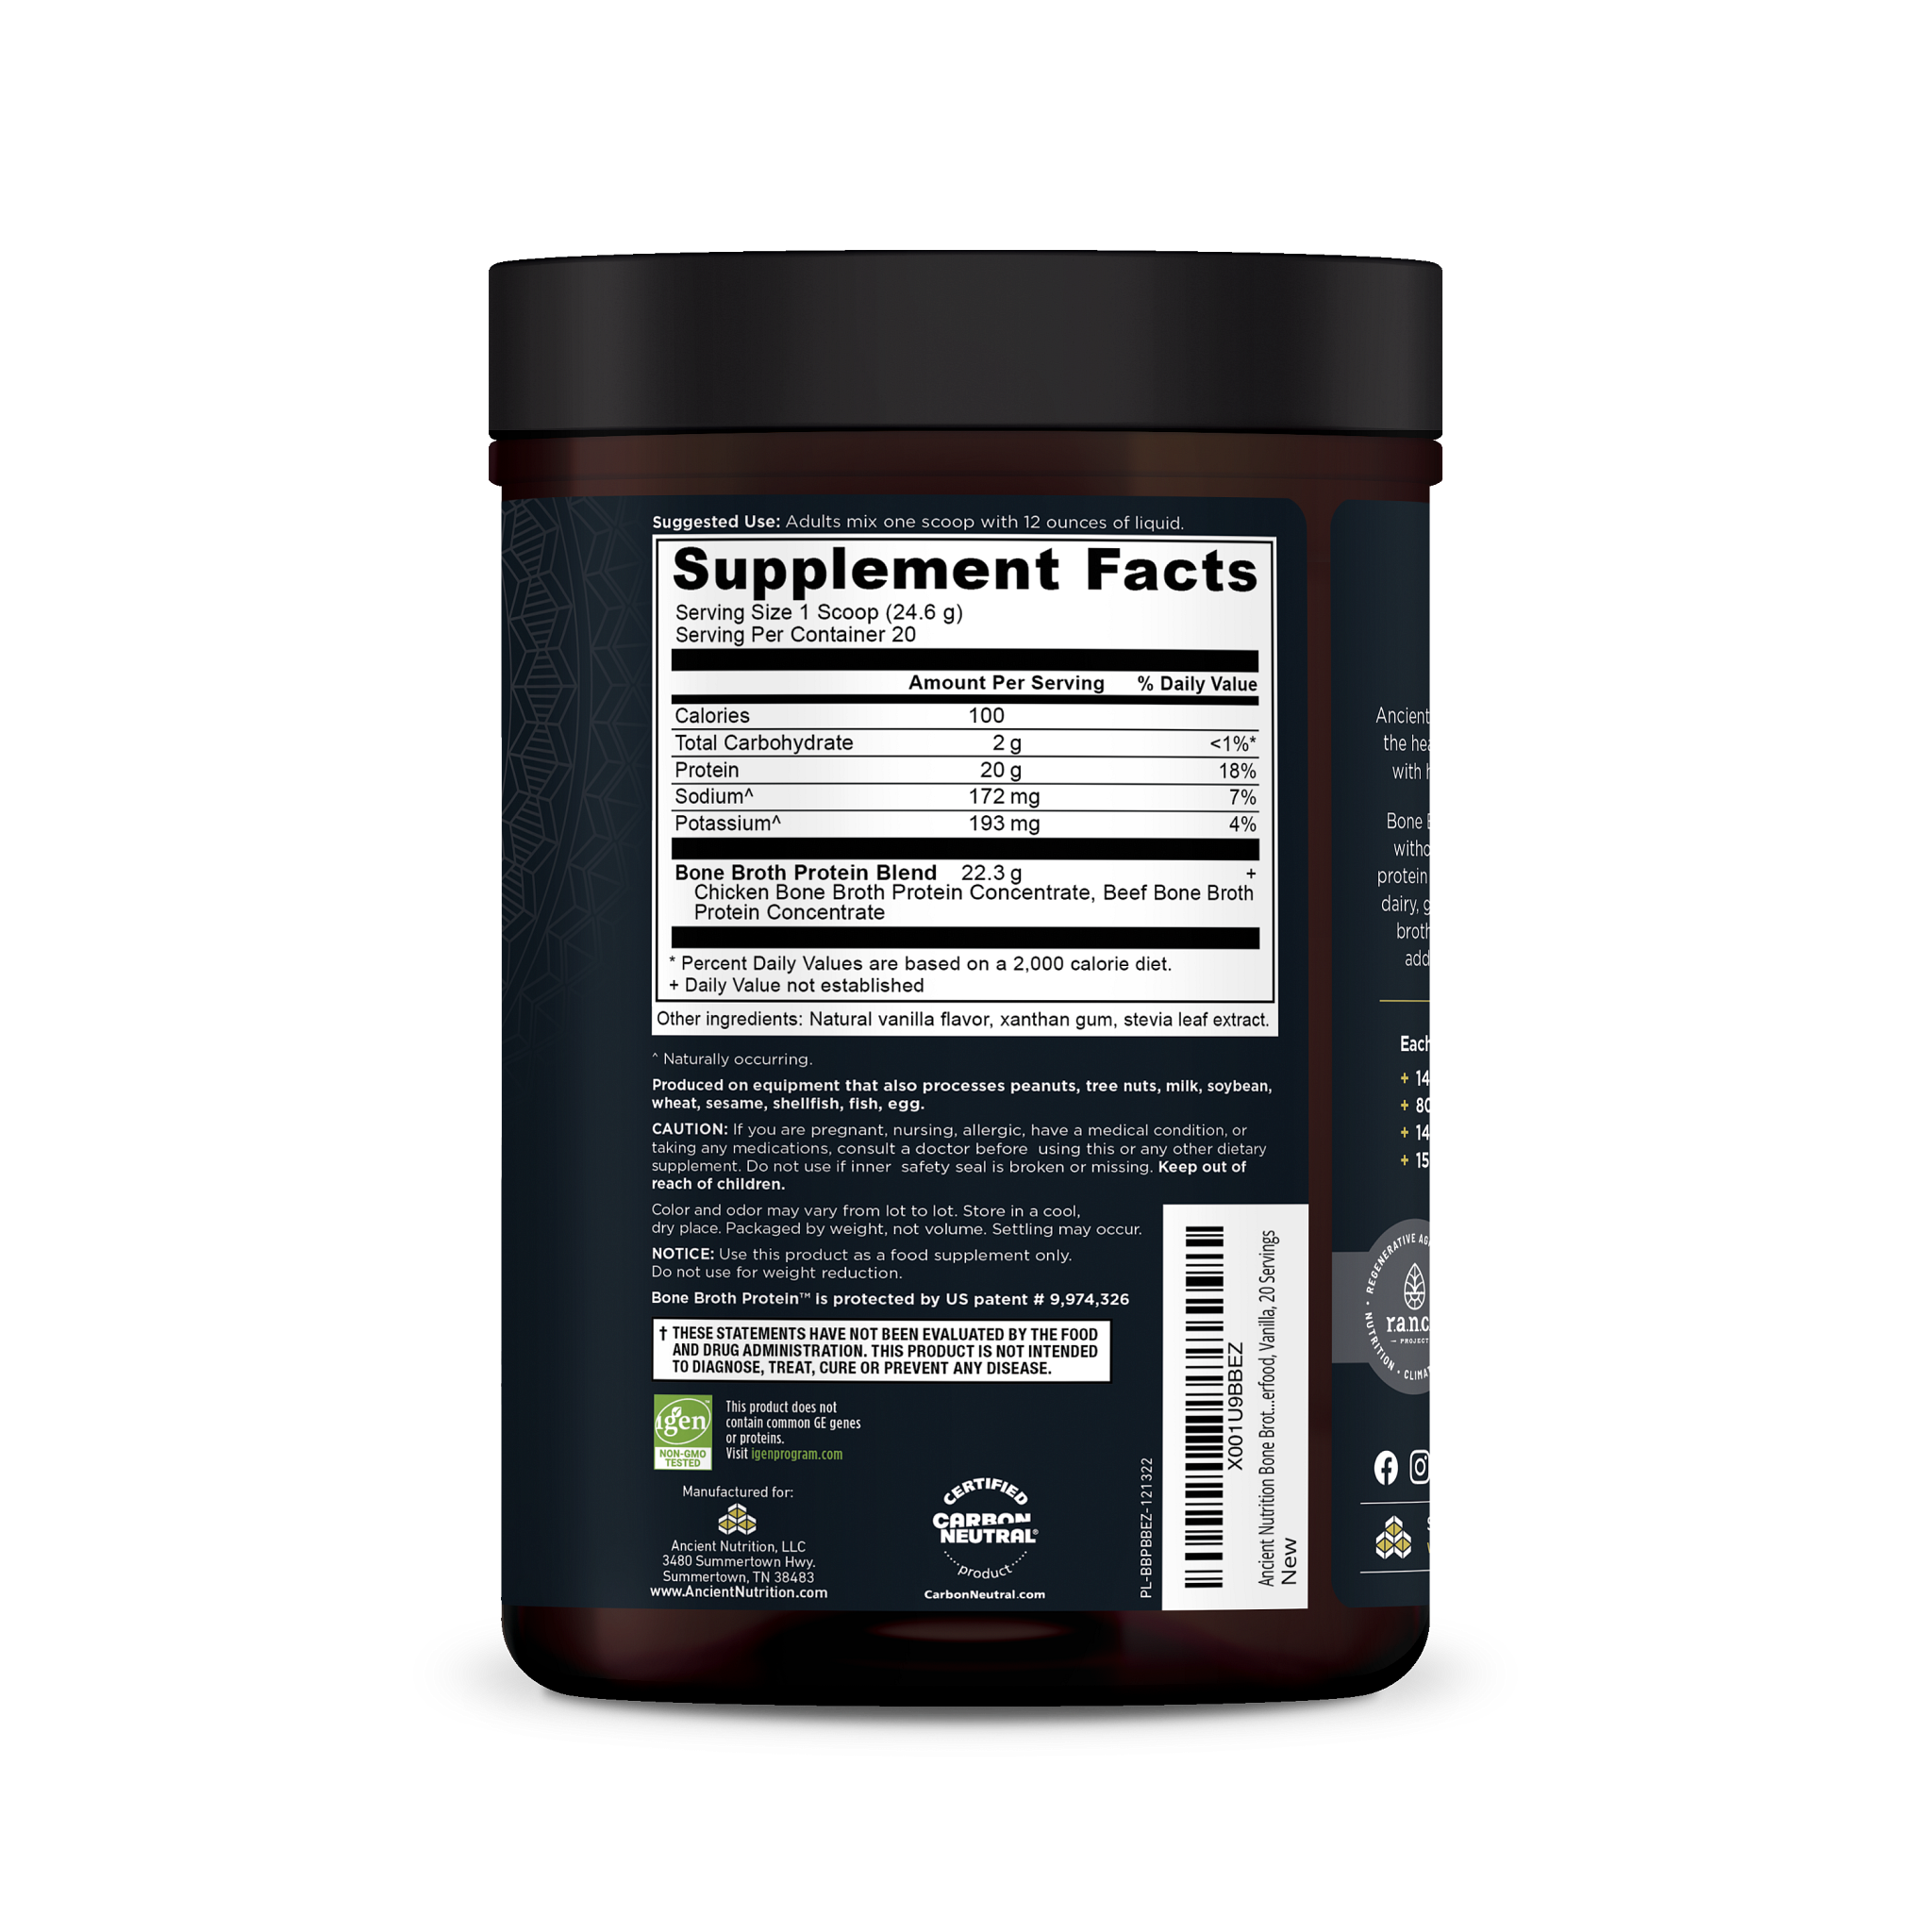 Super Greens Powder by Ancient Nutrition, Organic Superfood Powder with  Probiotics Made with Spirulina, Chlorella, Matcha, and Digestive Enzymes,  25 Servings, 7.5oz Greens Flavor